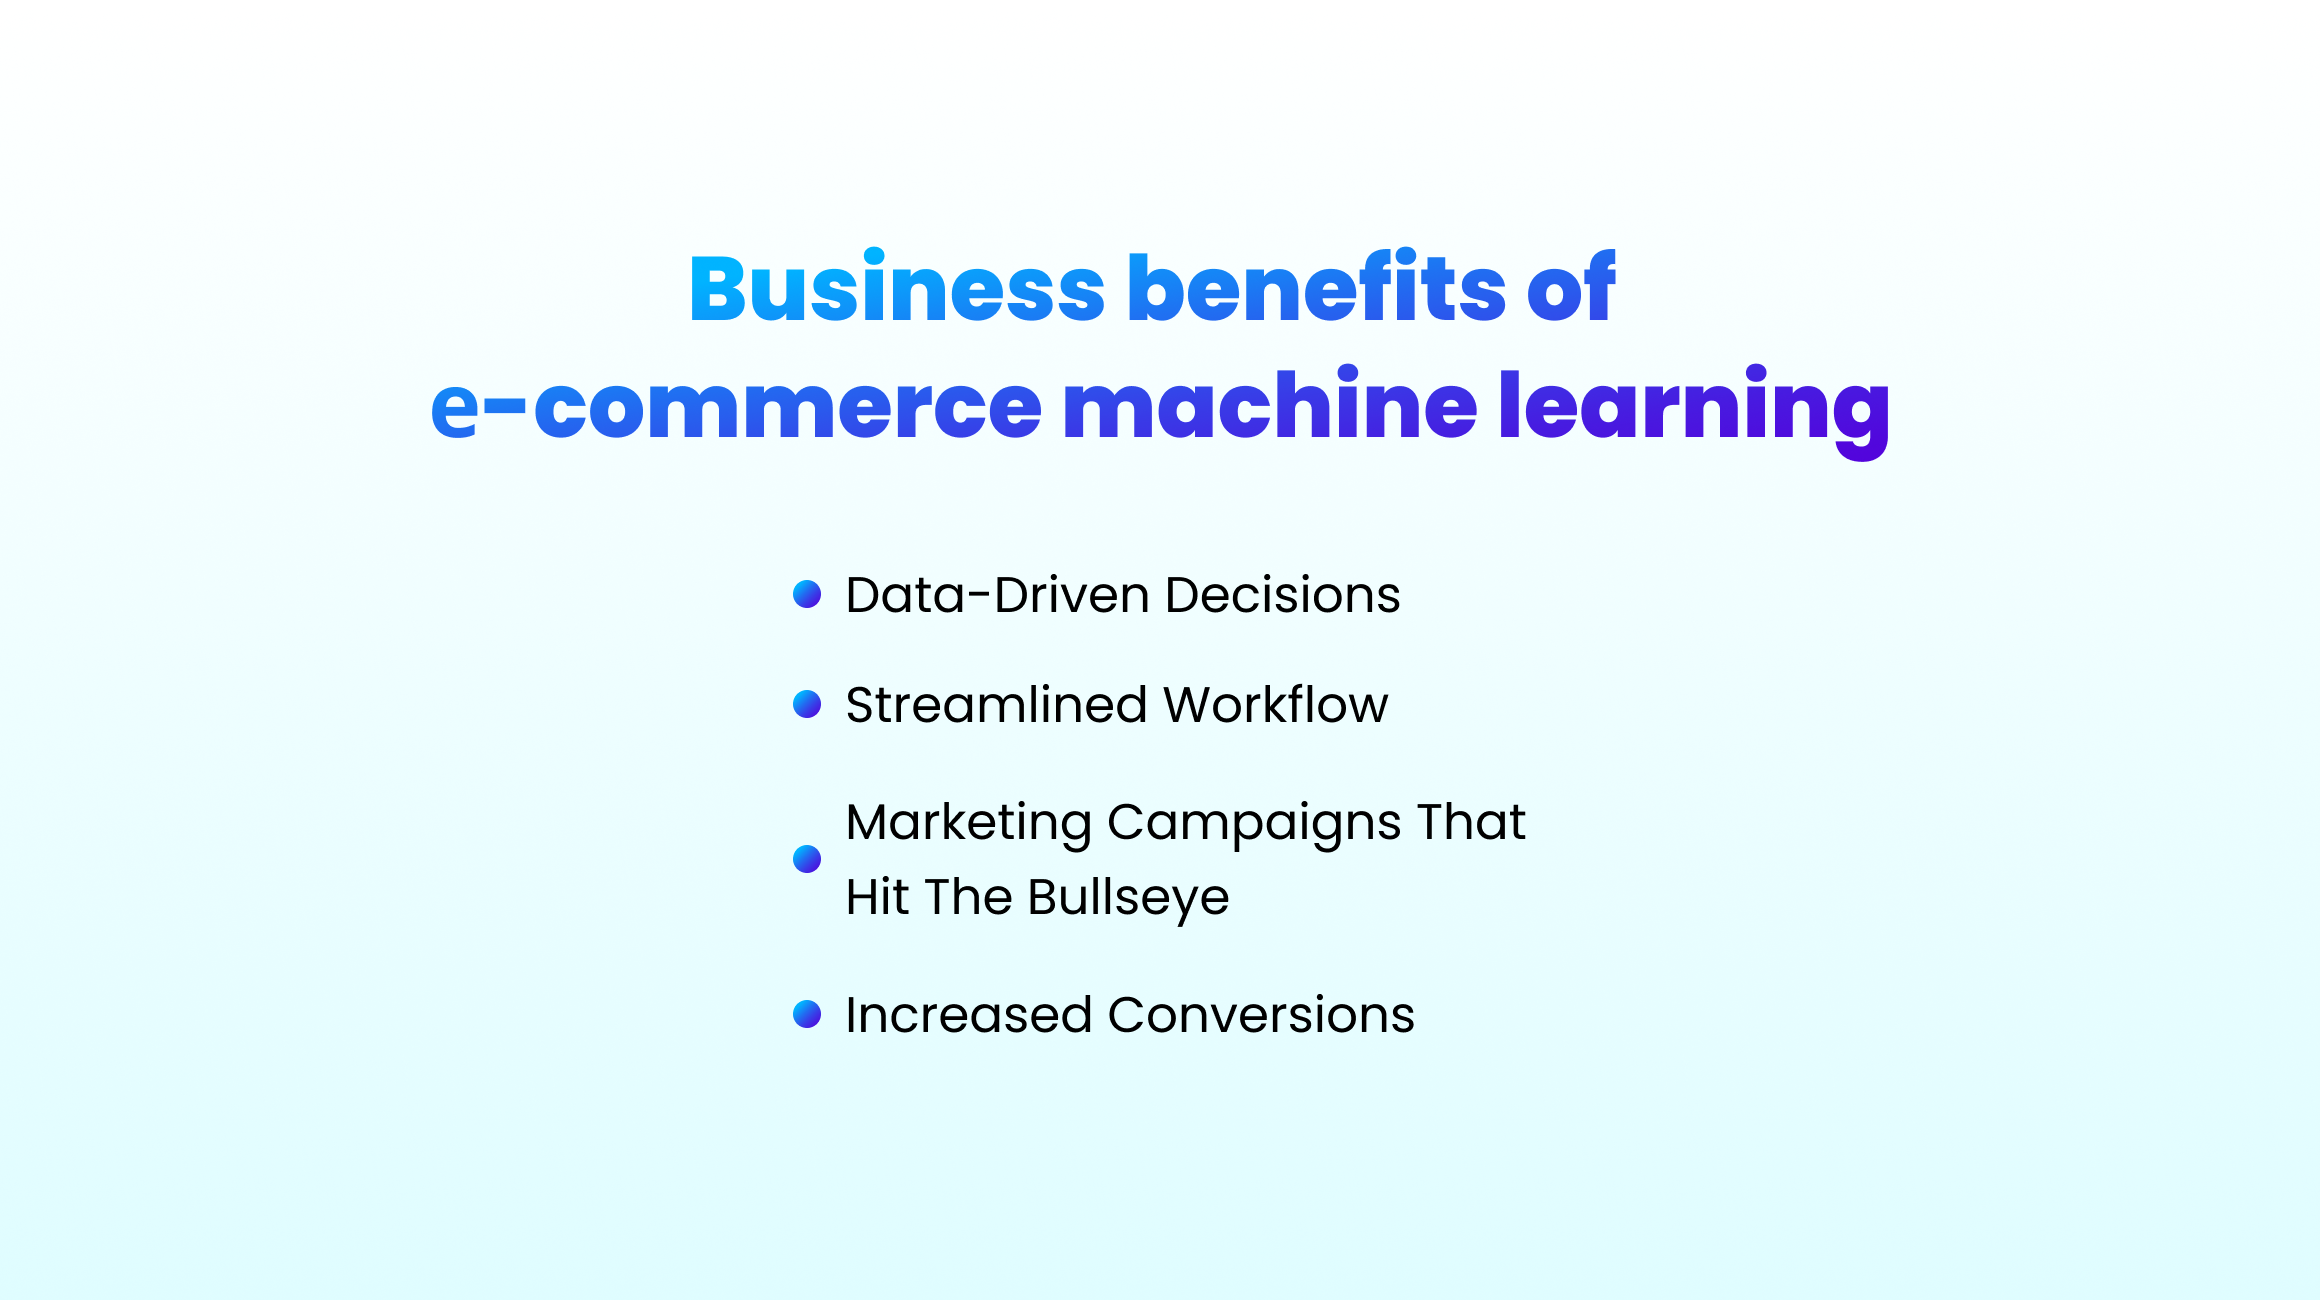 Machine Learning in E-Commerce Benefits